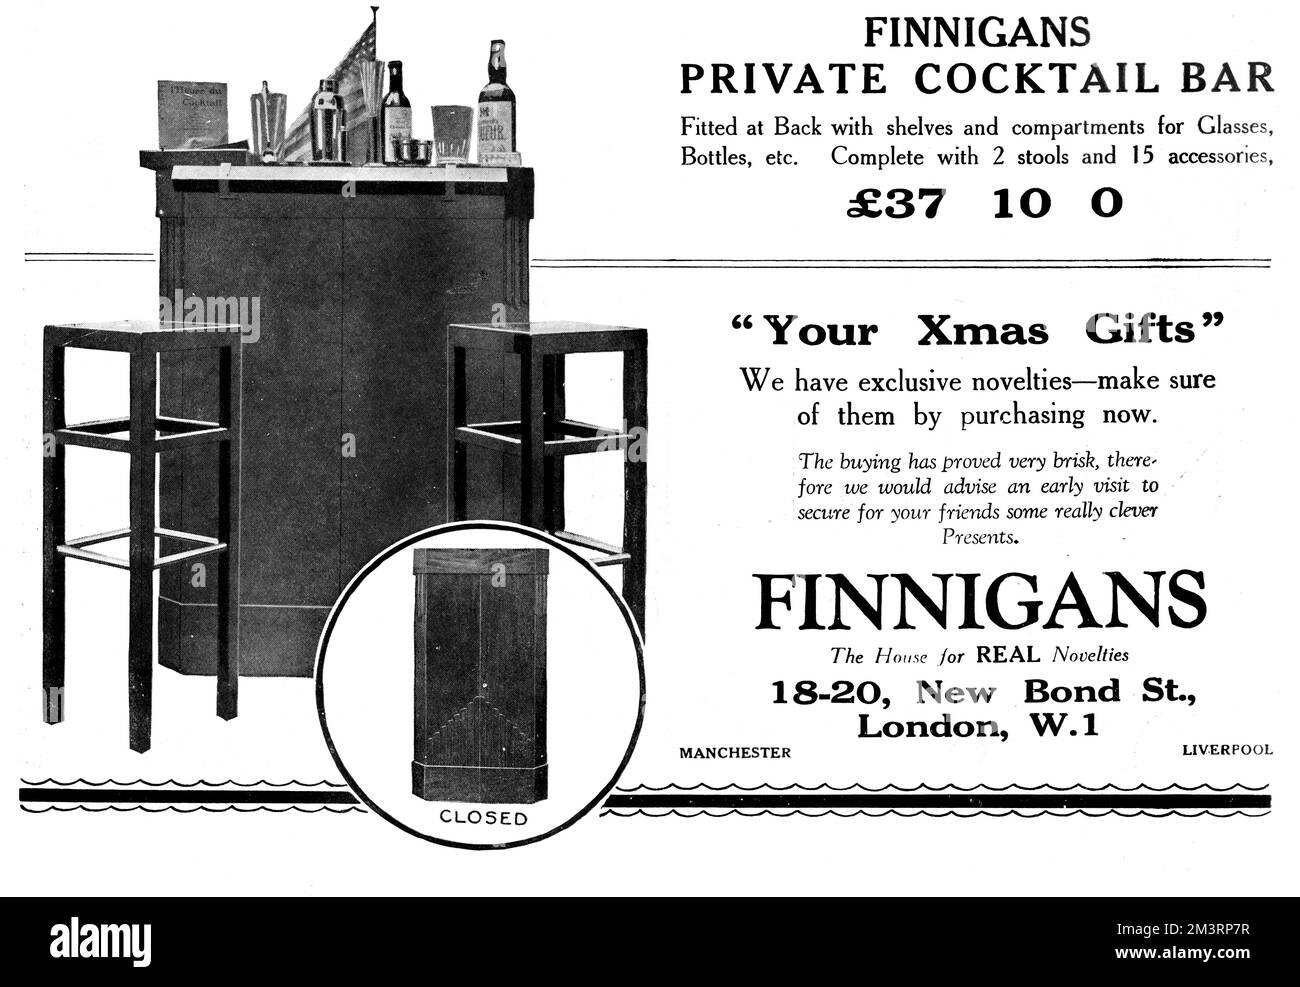 Black and white advert in the Sketch for Finnigans of New Bond Street, London, featuring their Private Cocktail Bar which was '...fitted at Back with shelves and compartments for Glasses, Bottles, etc. Complete with 2 stools and 15 accessories', all for the sum of 37 10 shillings.      Date: 12th December 1928 Stock Photo